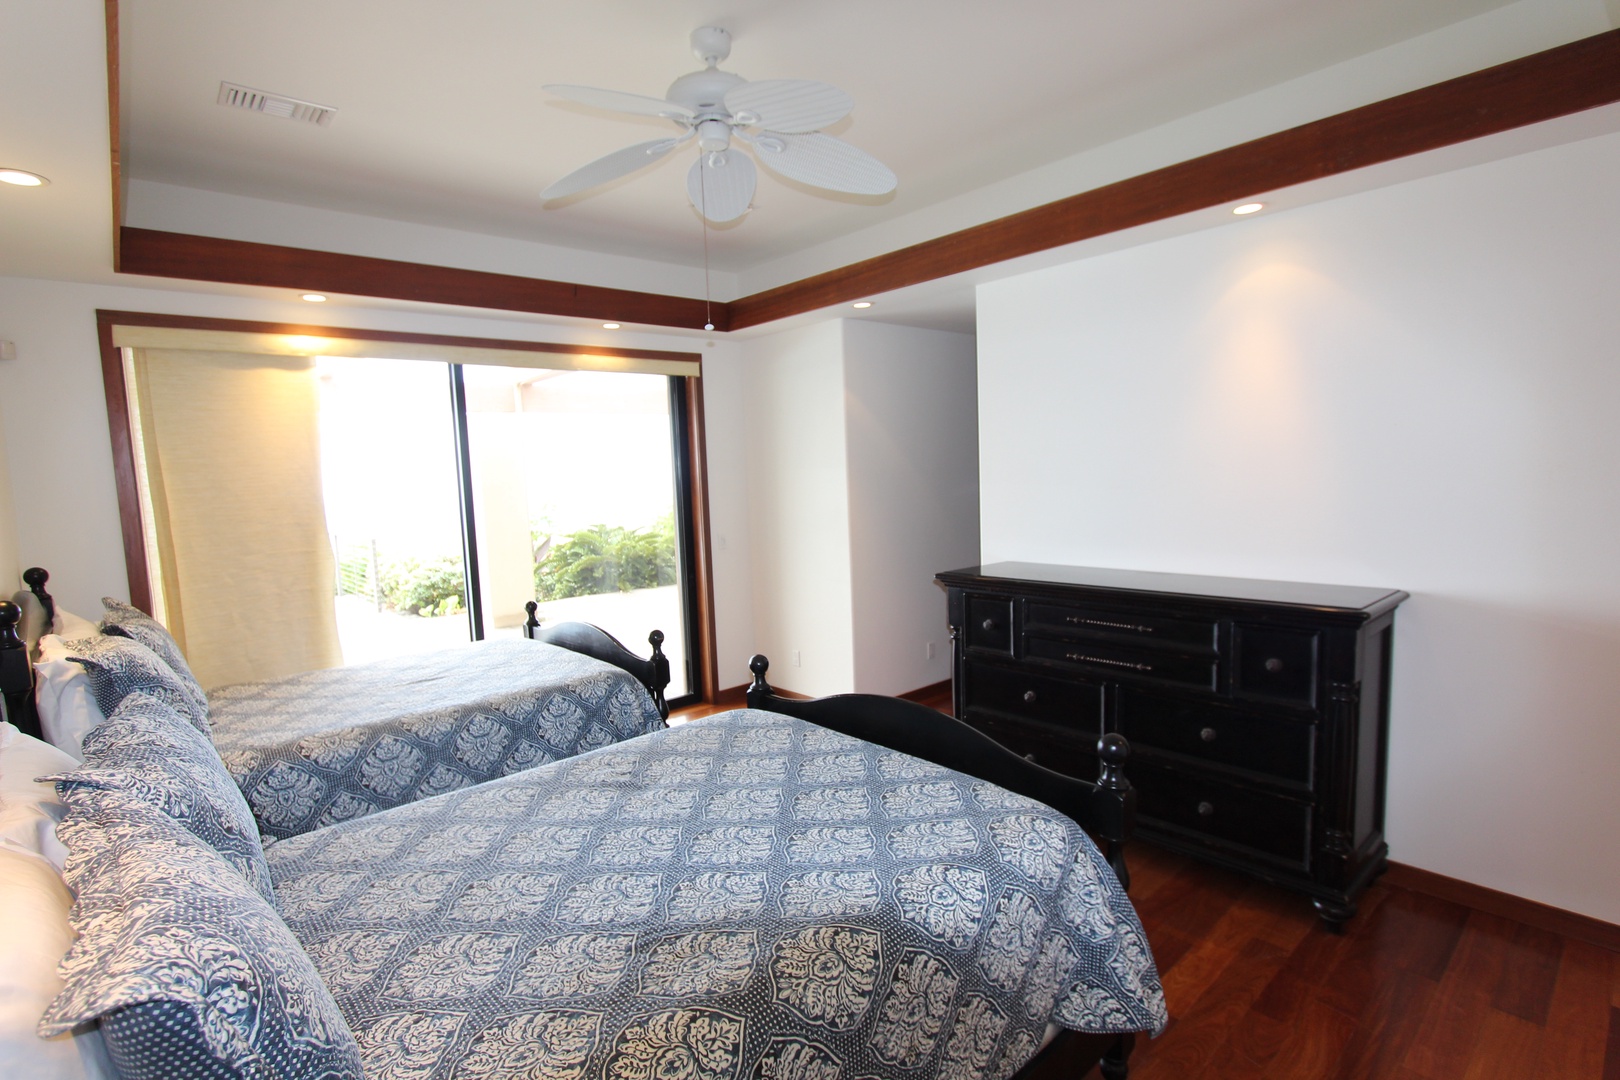 Kailua Kona Vacation Rentals, O'oma Plantation - Guest room with double beds and Lanai access